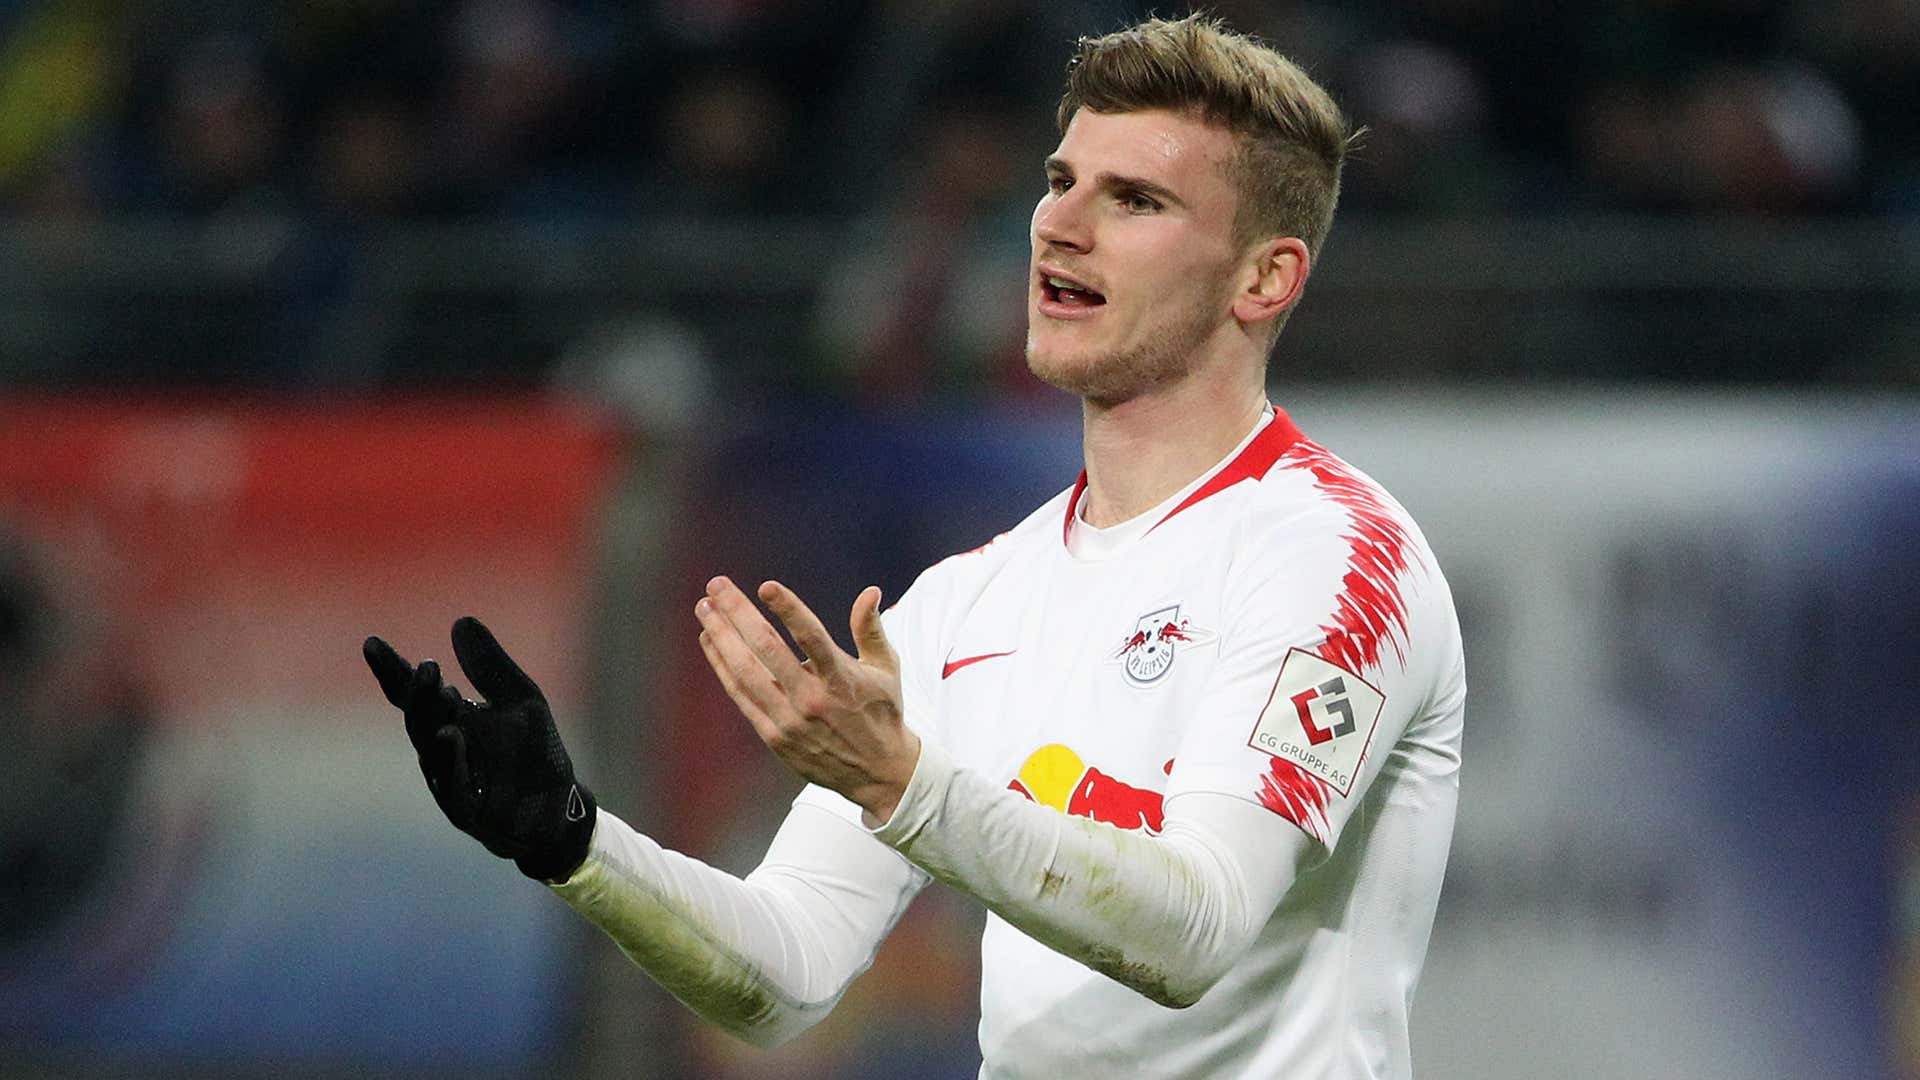 Timo Werner RB Leipzig 2018-19